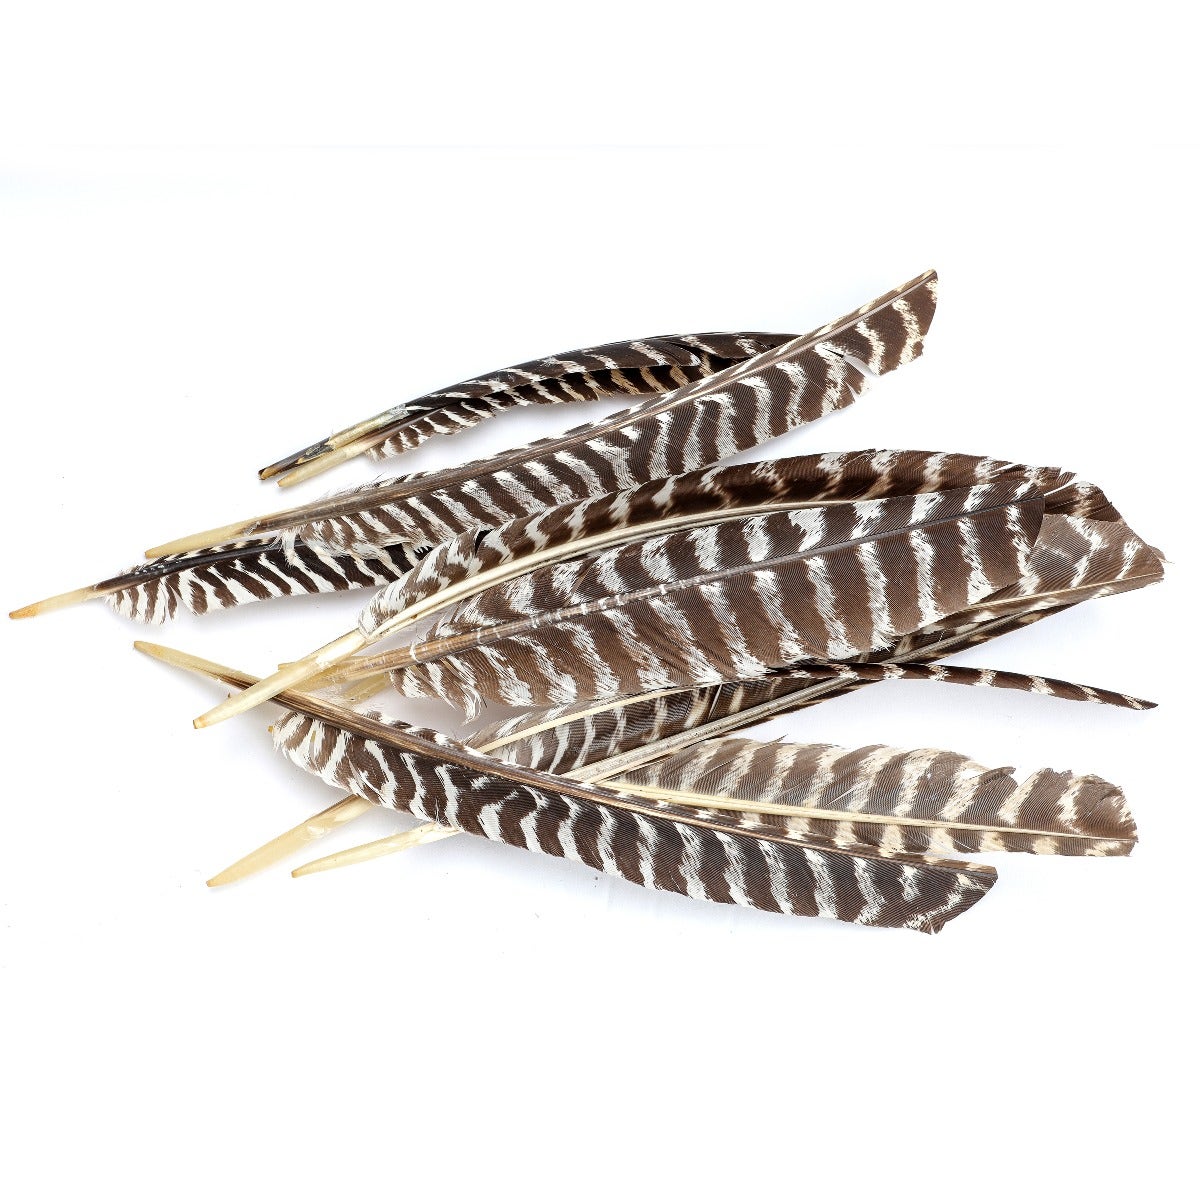 TURKEY FEATHERS 6 feathers BLACK BASE WITH GLOSS RED TIP [USA seller]